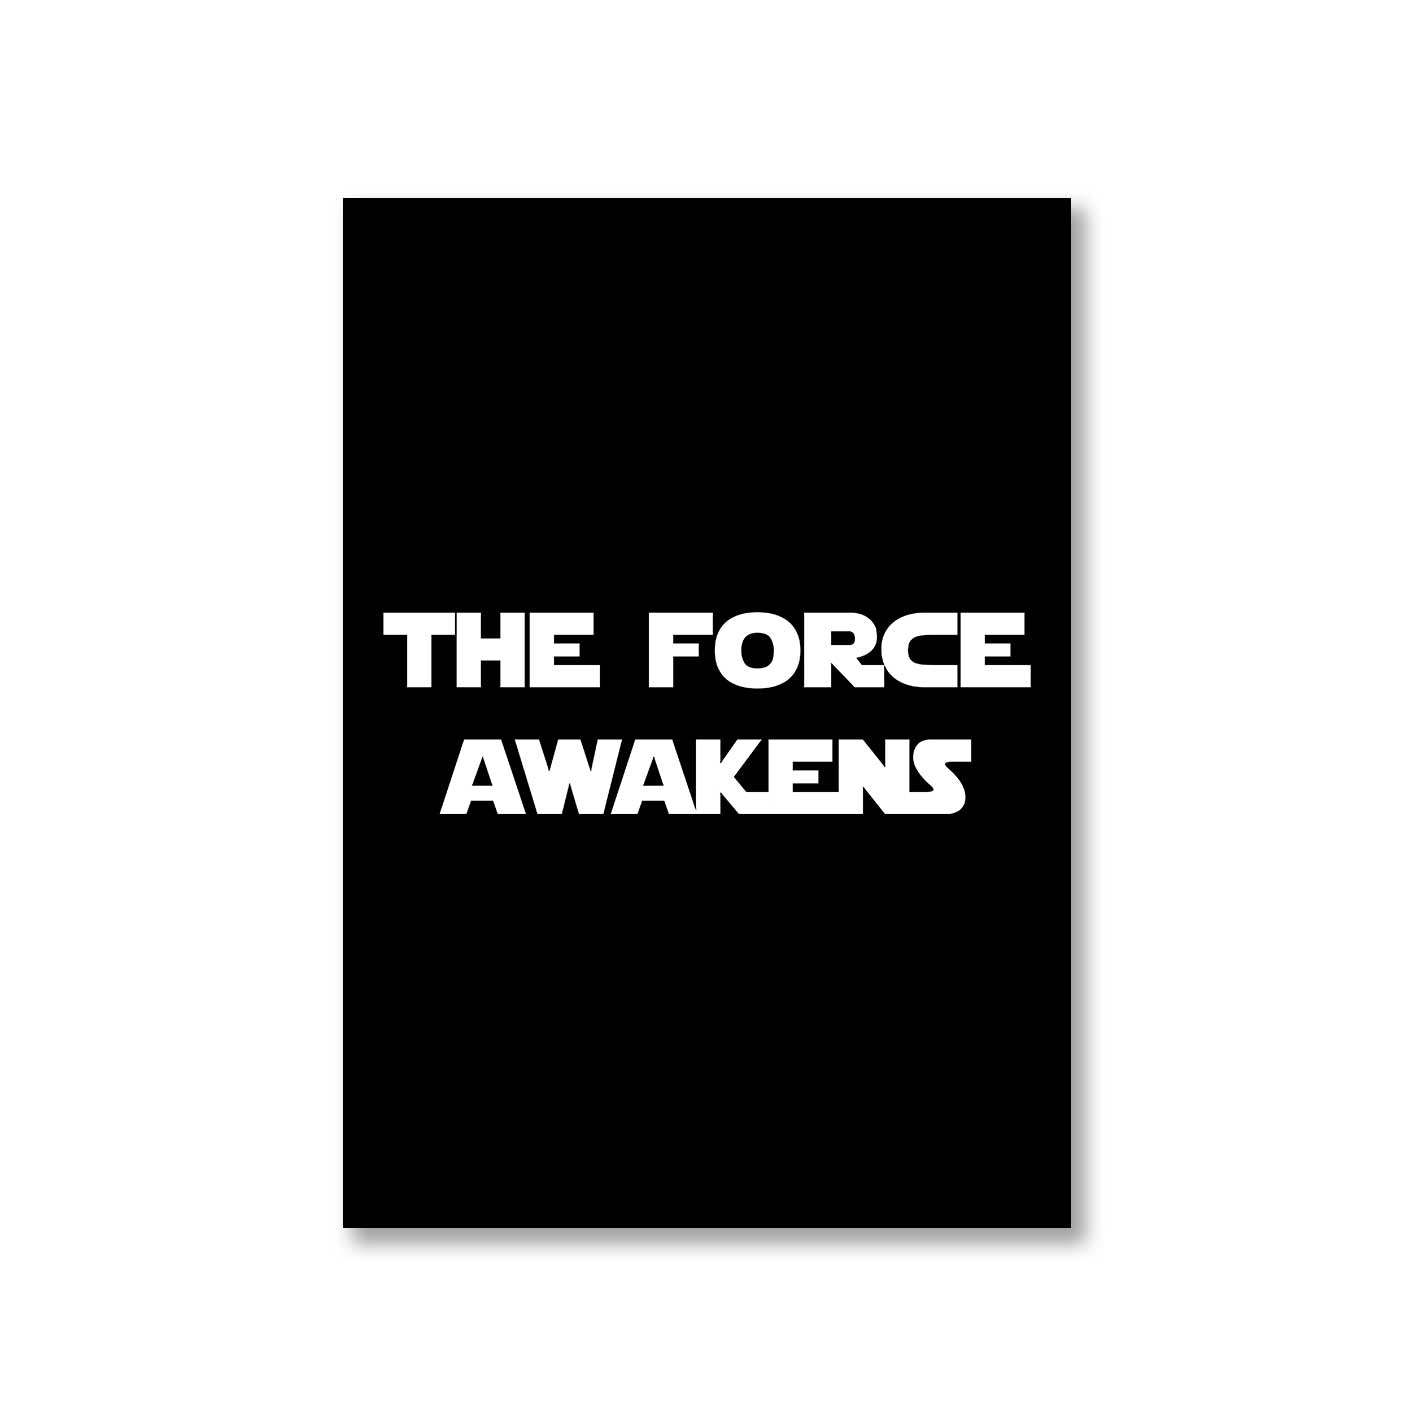 star wars the force awakens poster wall art buy online india the banyan tee tbt a4